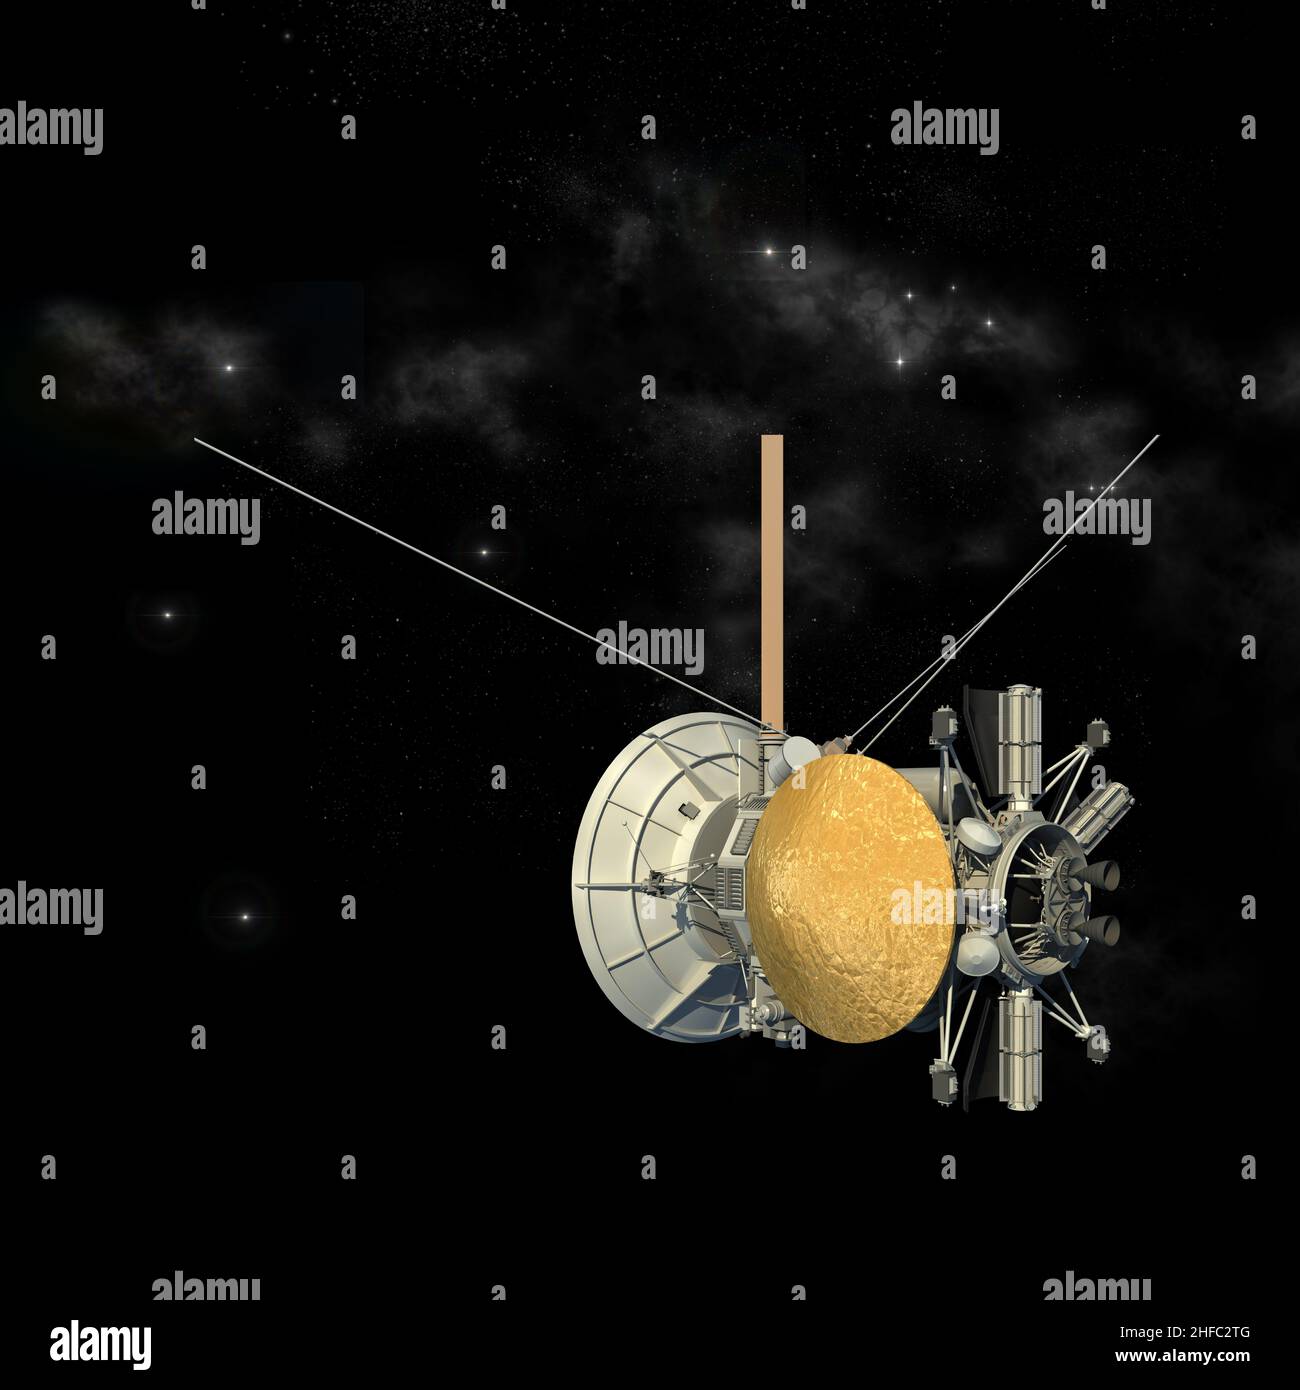 Unmanned spacecraft similar to the Cassini Huygens orbiter satellite, with the isolation path included in the 3D illustration. Stock Photo